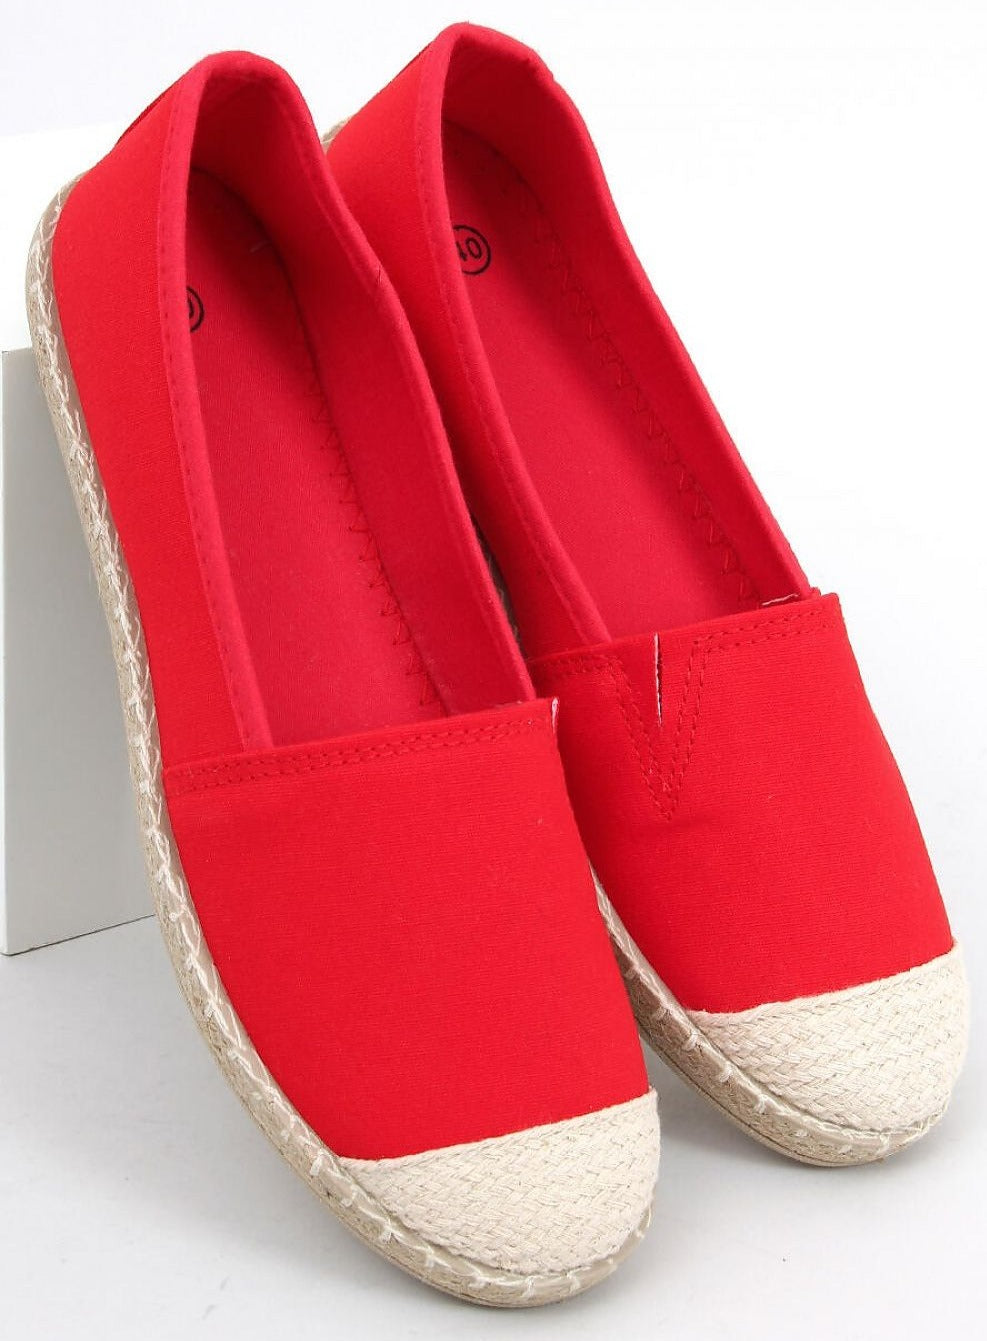 TEEK - Red Flat Espadrille Loafer Shoes SHOES TEEK MH   